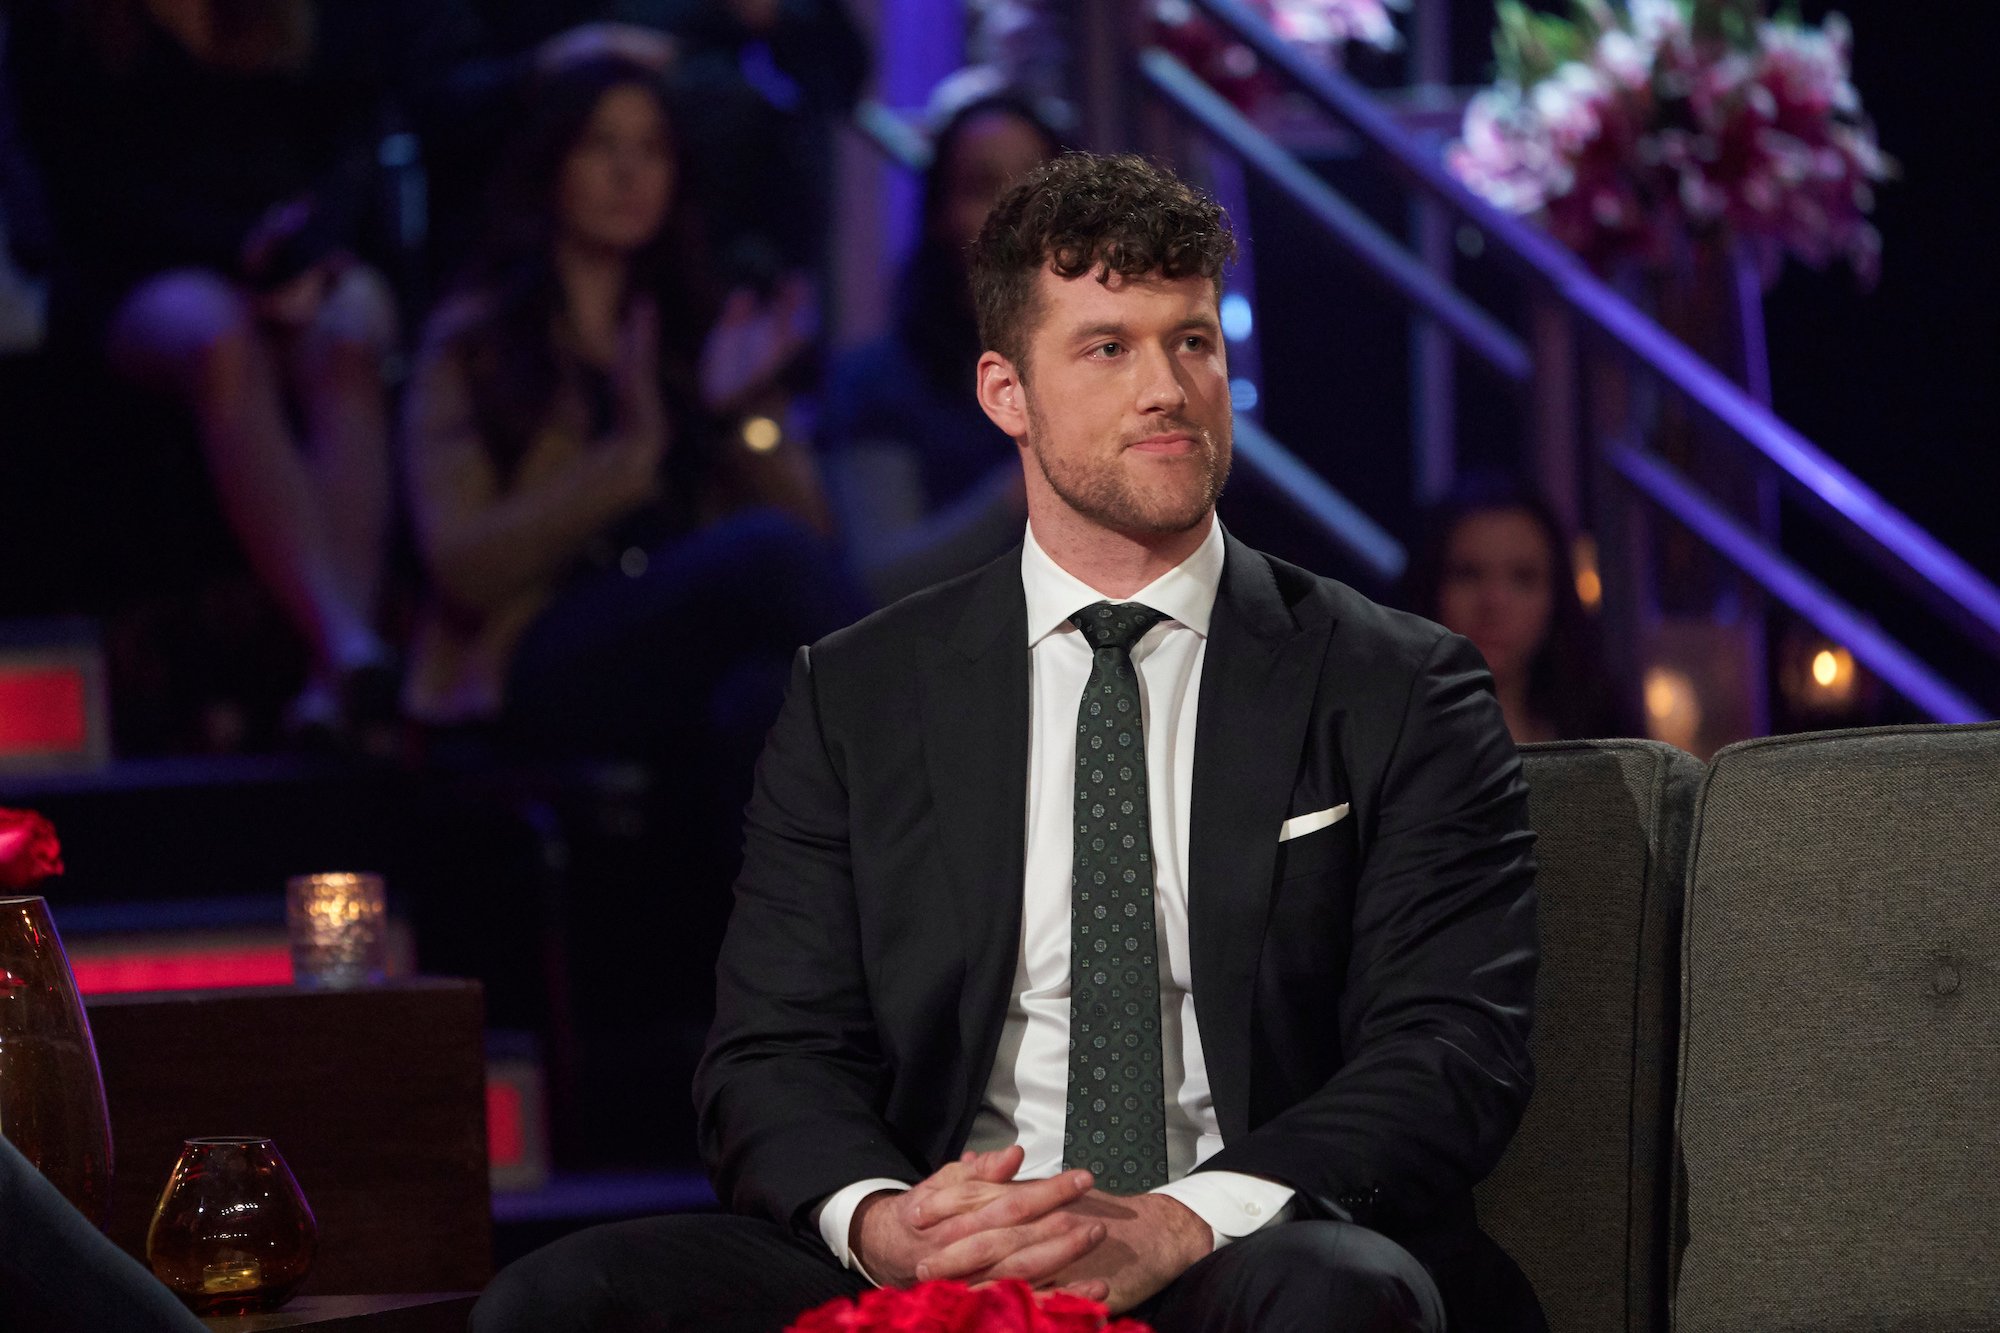 'The Bachelor' lead Clayton Echard, seen here wearing a suit at the 'Women Tell All,' played a big part in the 'Rose Ceremony from Hell.'